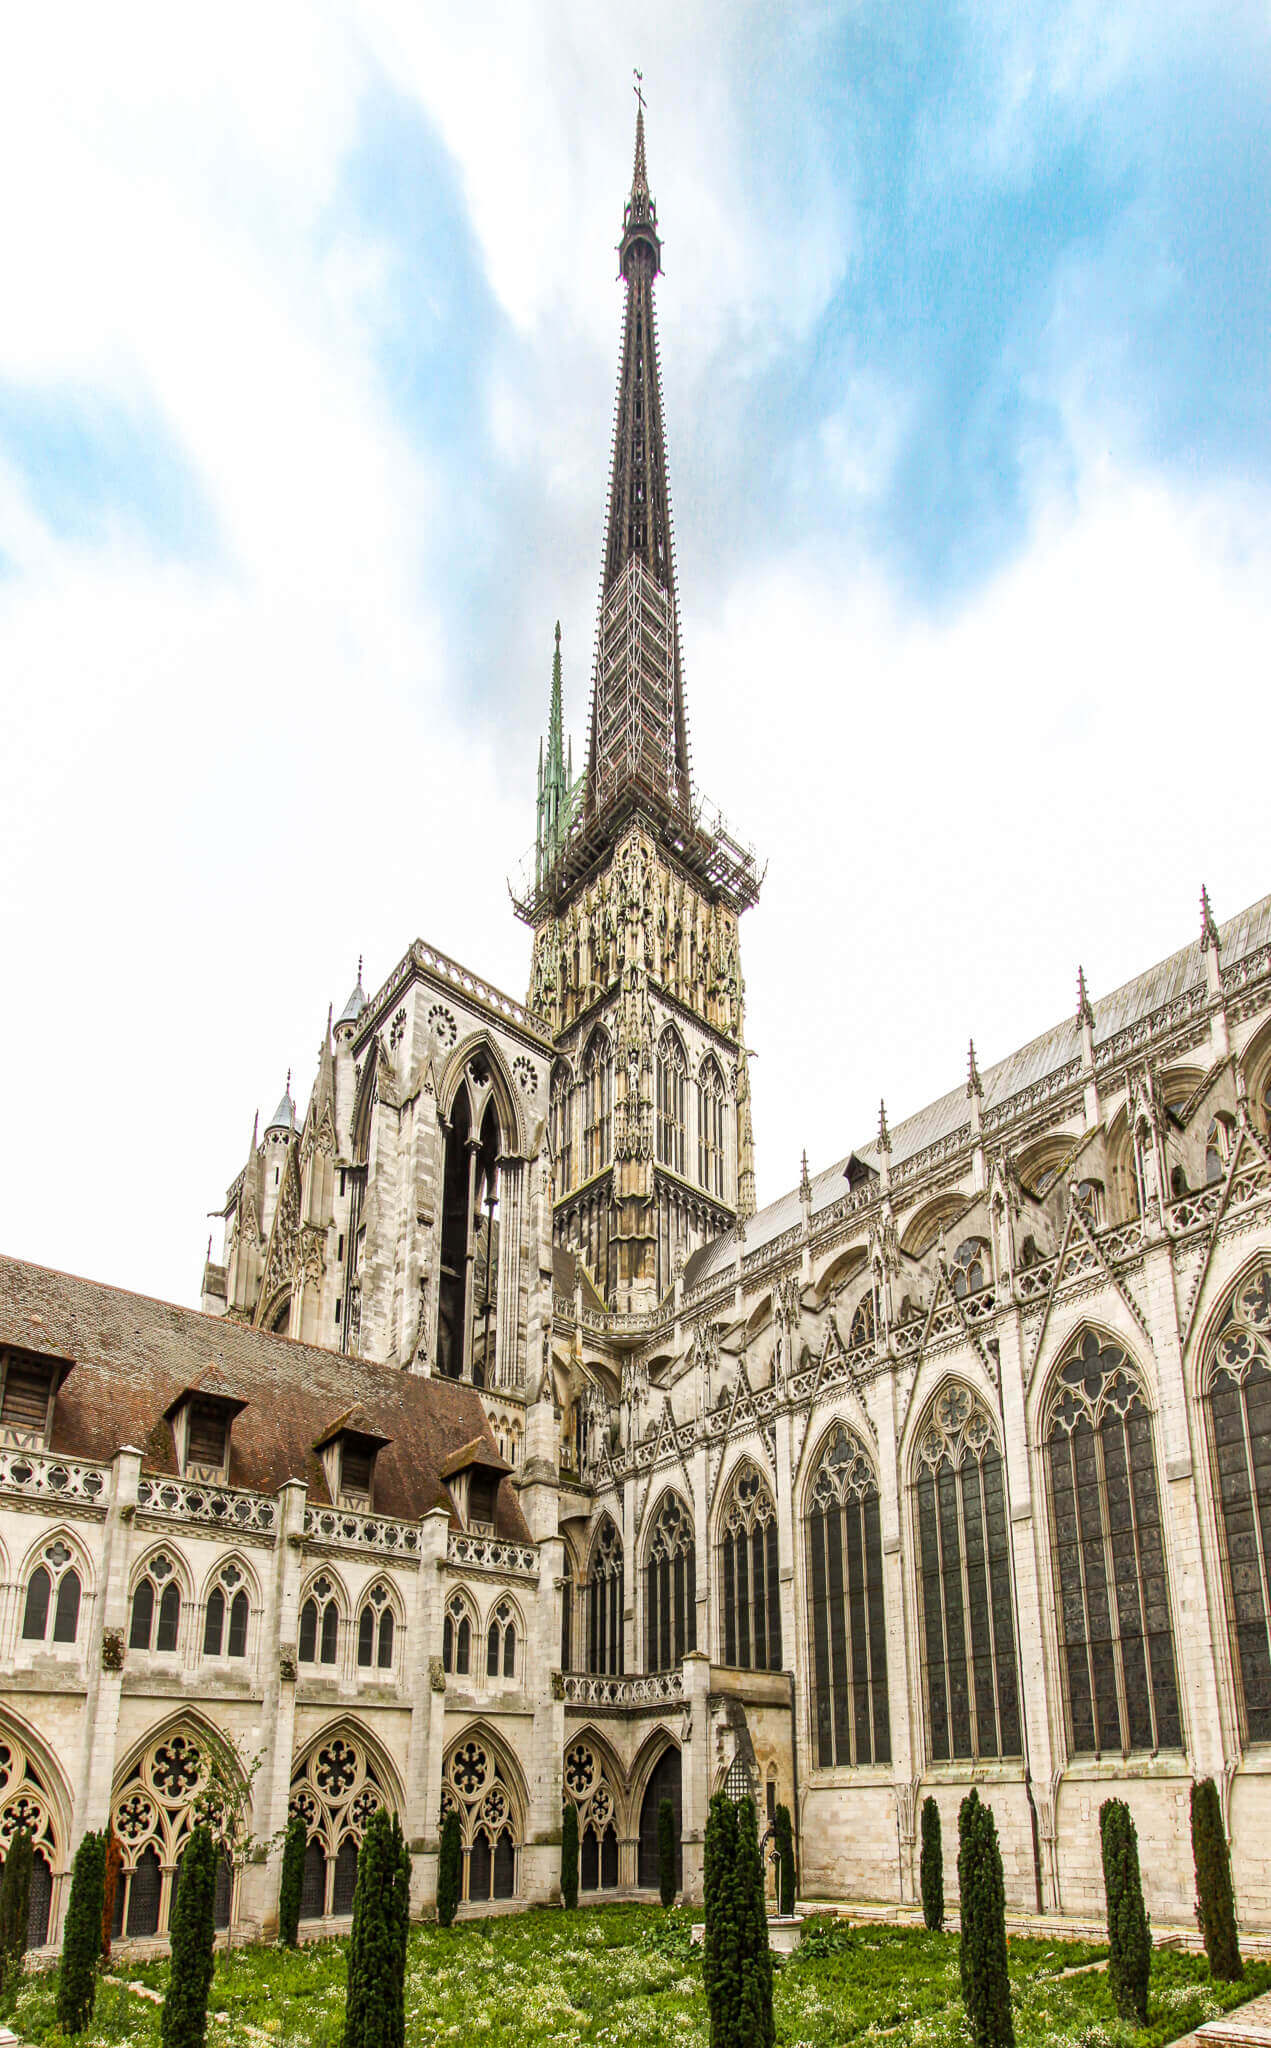 The central spire of the Rouen Cethedral